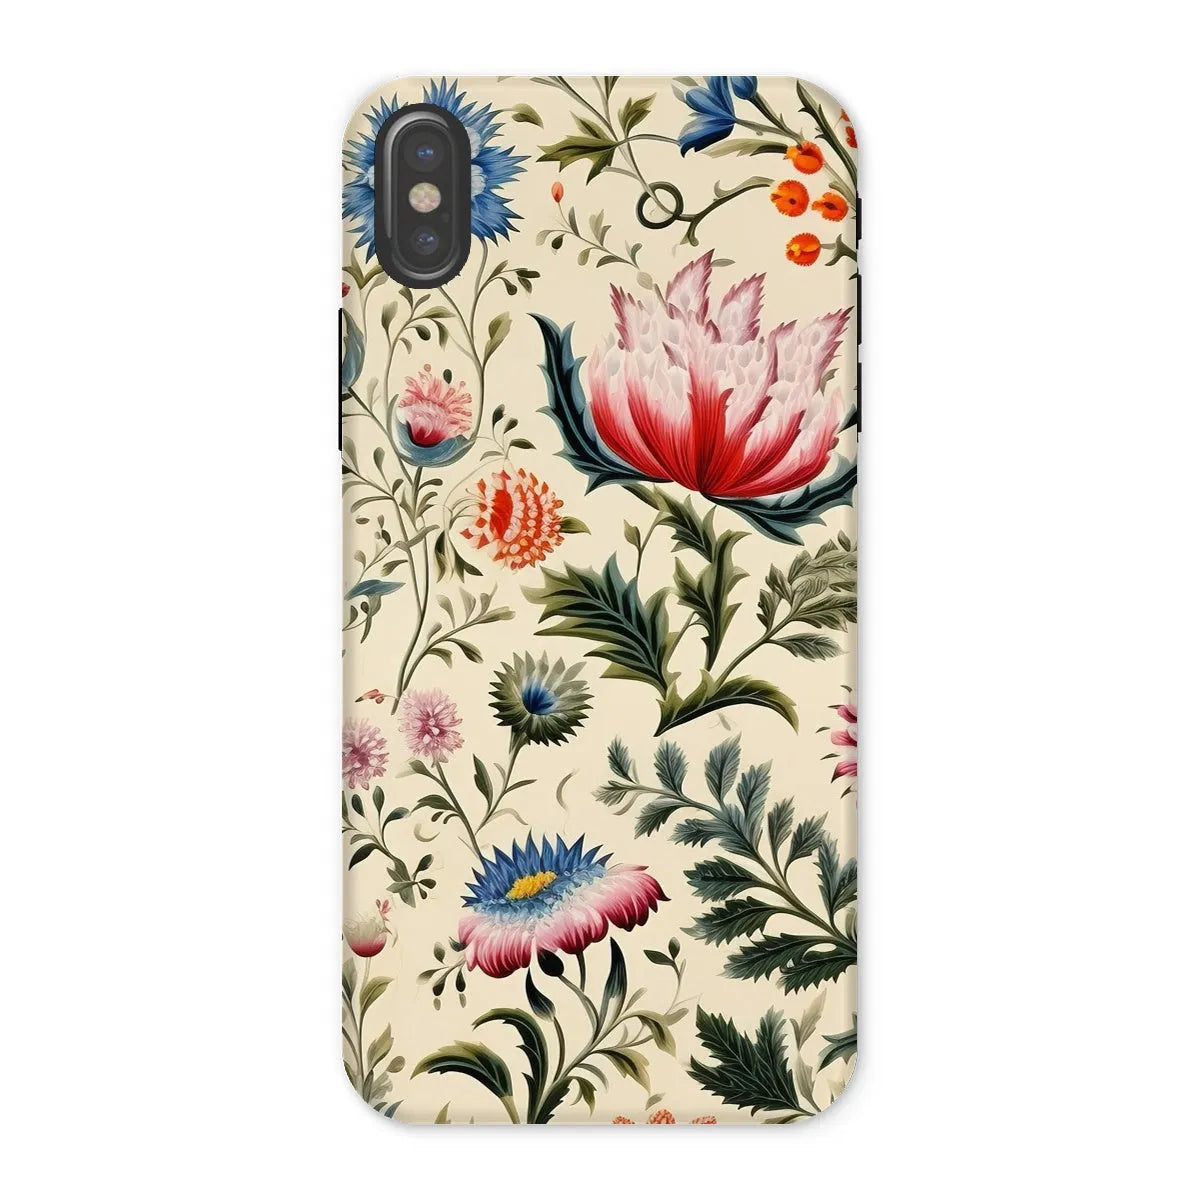 Wildflower Hoopla - Floral Garden Aesthetic Phone Case - Iphone x / Matte - Mobile Phone Cases - Aesthetic Art